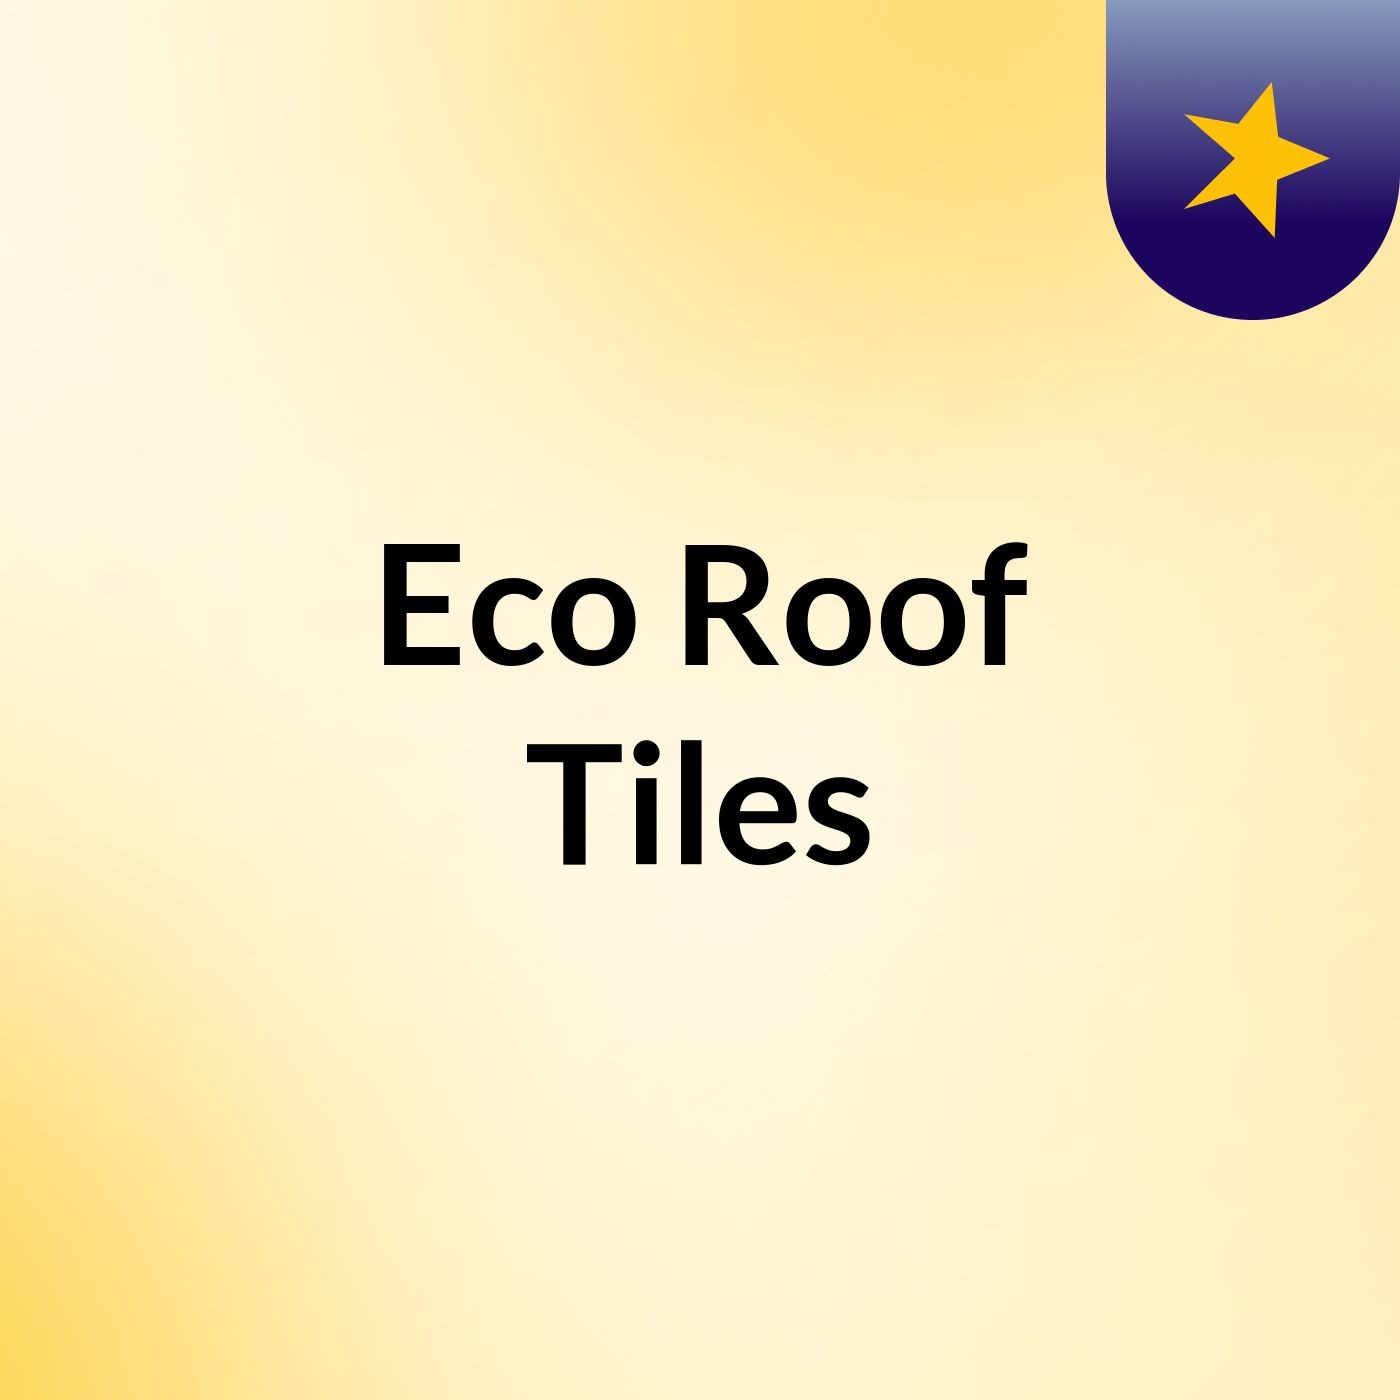 Eco Roof Tiles